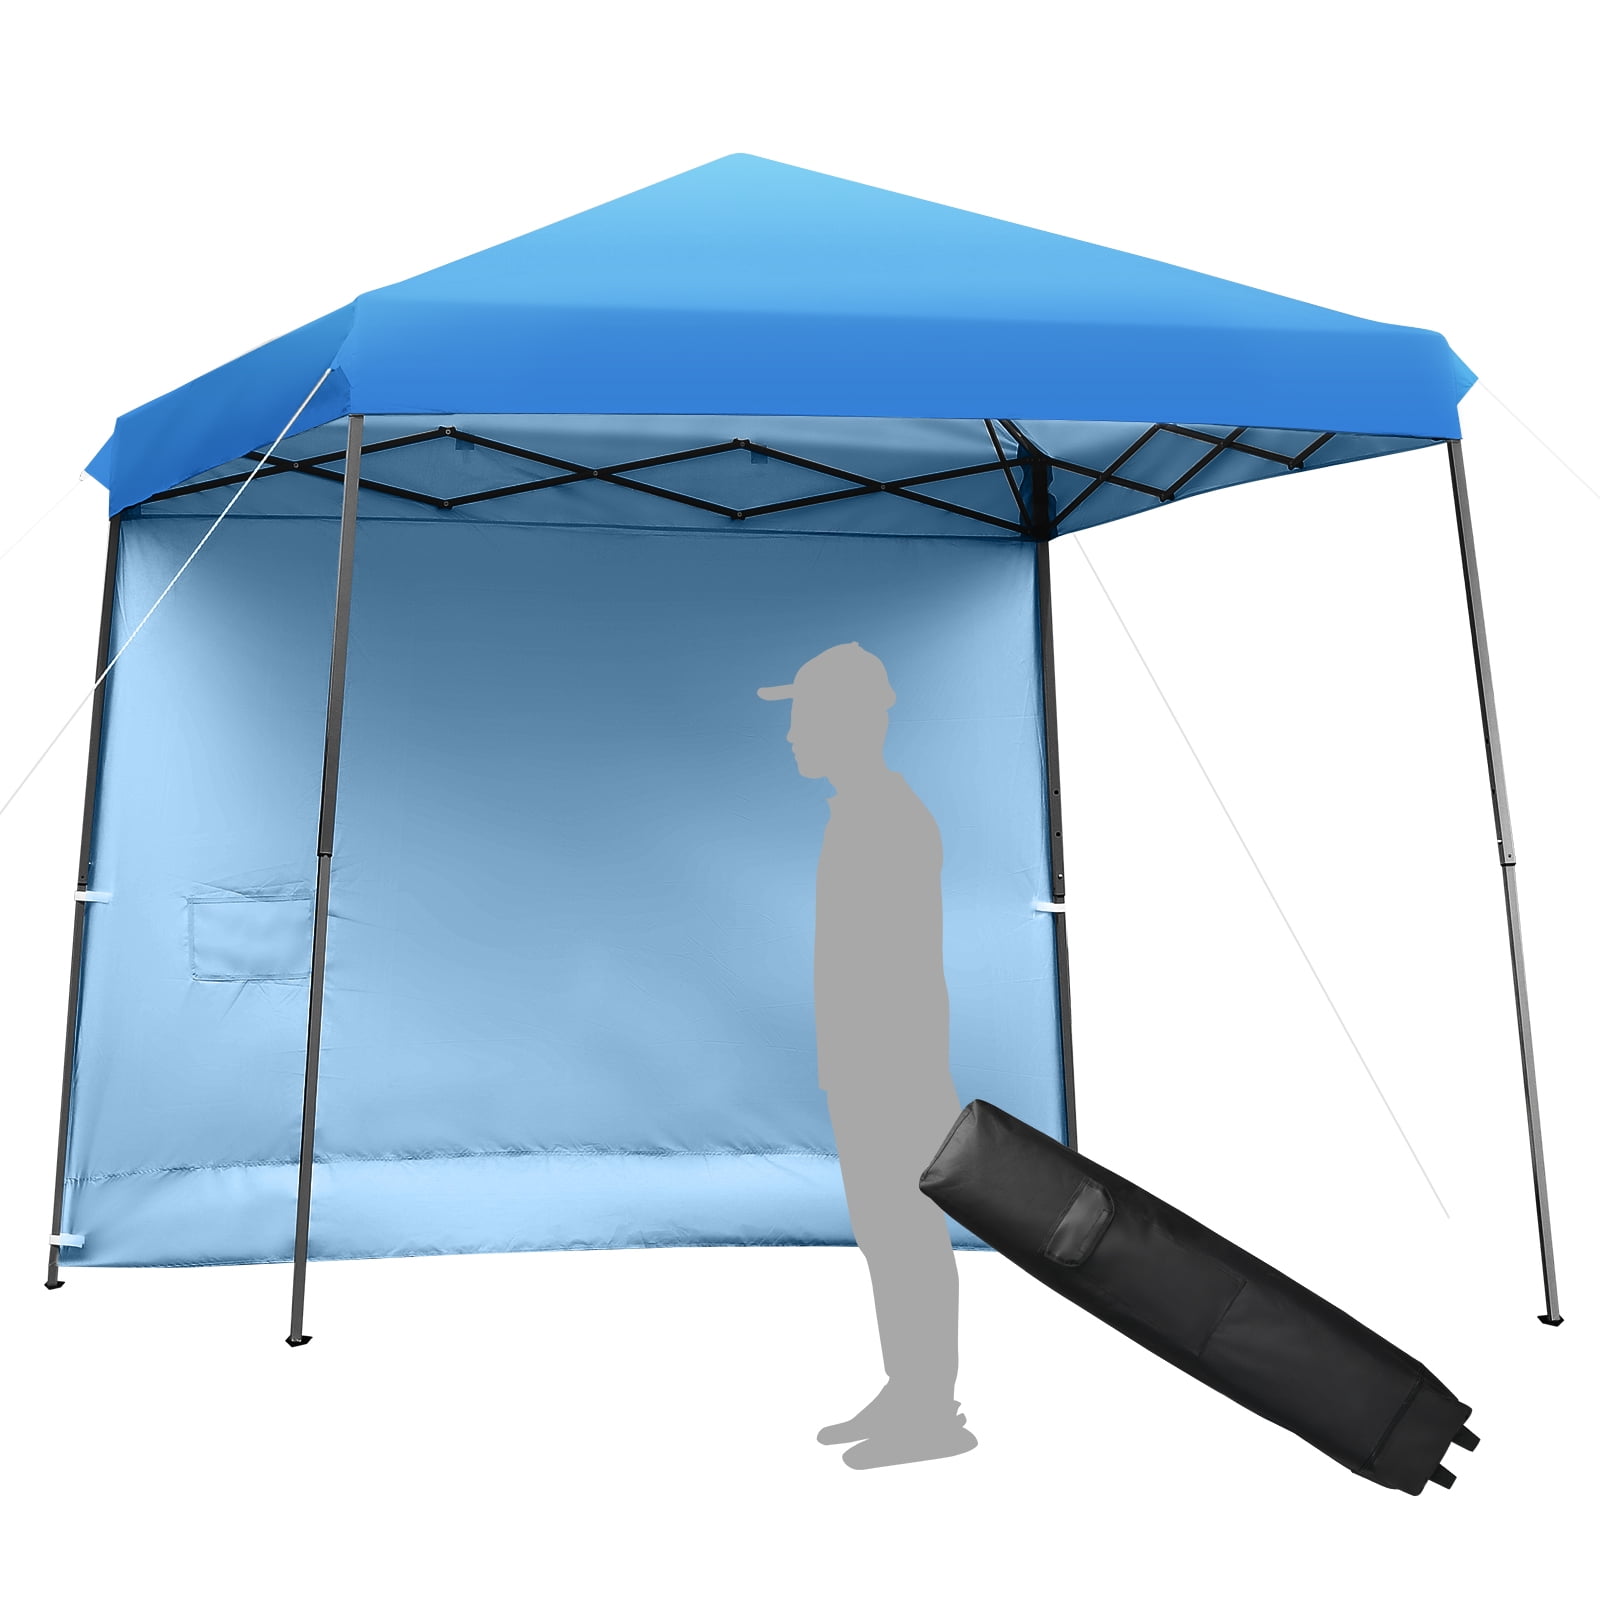 CORE 10' x 10' Instant Shelter Pop-Up Canopy Tent with Wheeled Carry Bag :  : Patio, Lawn & Garden